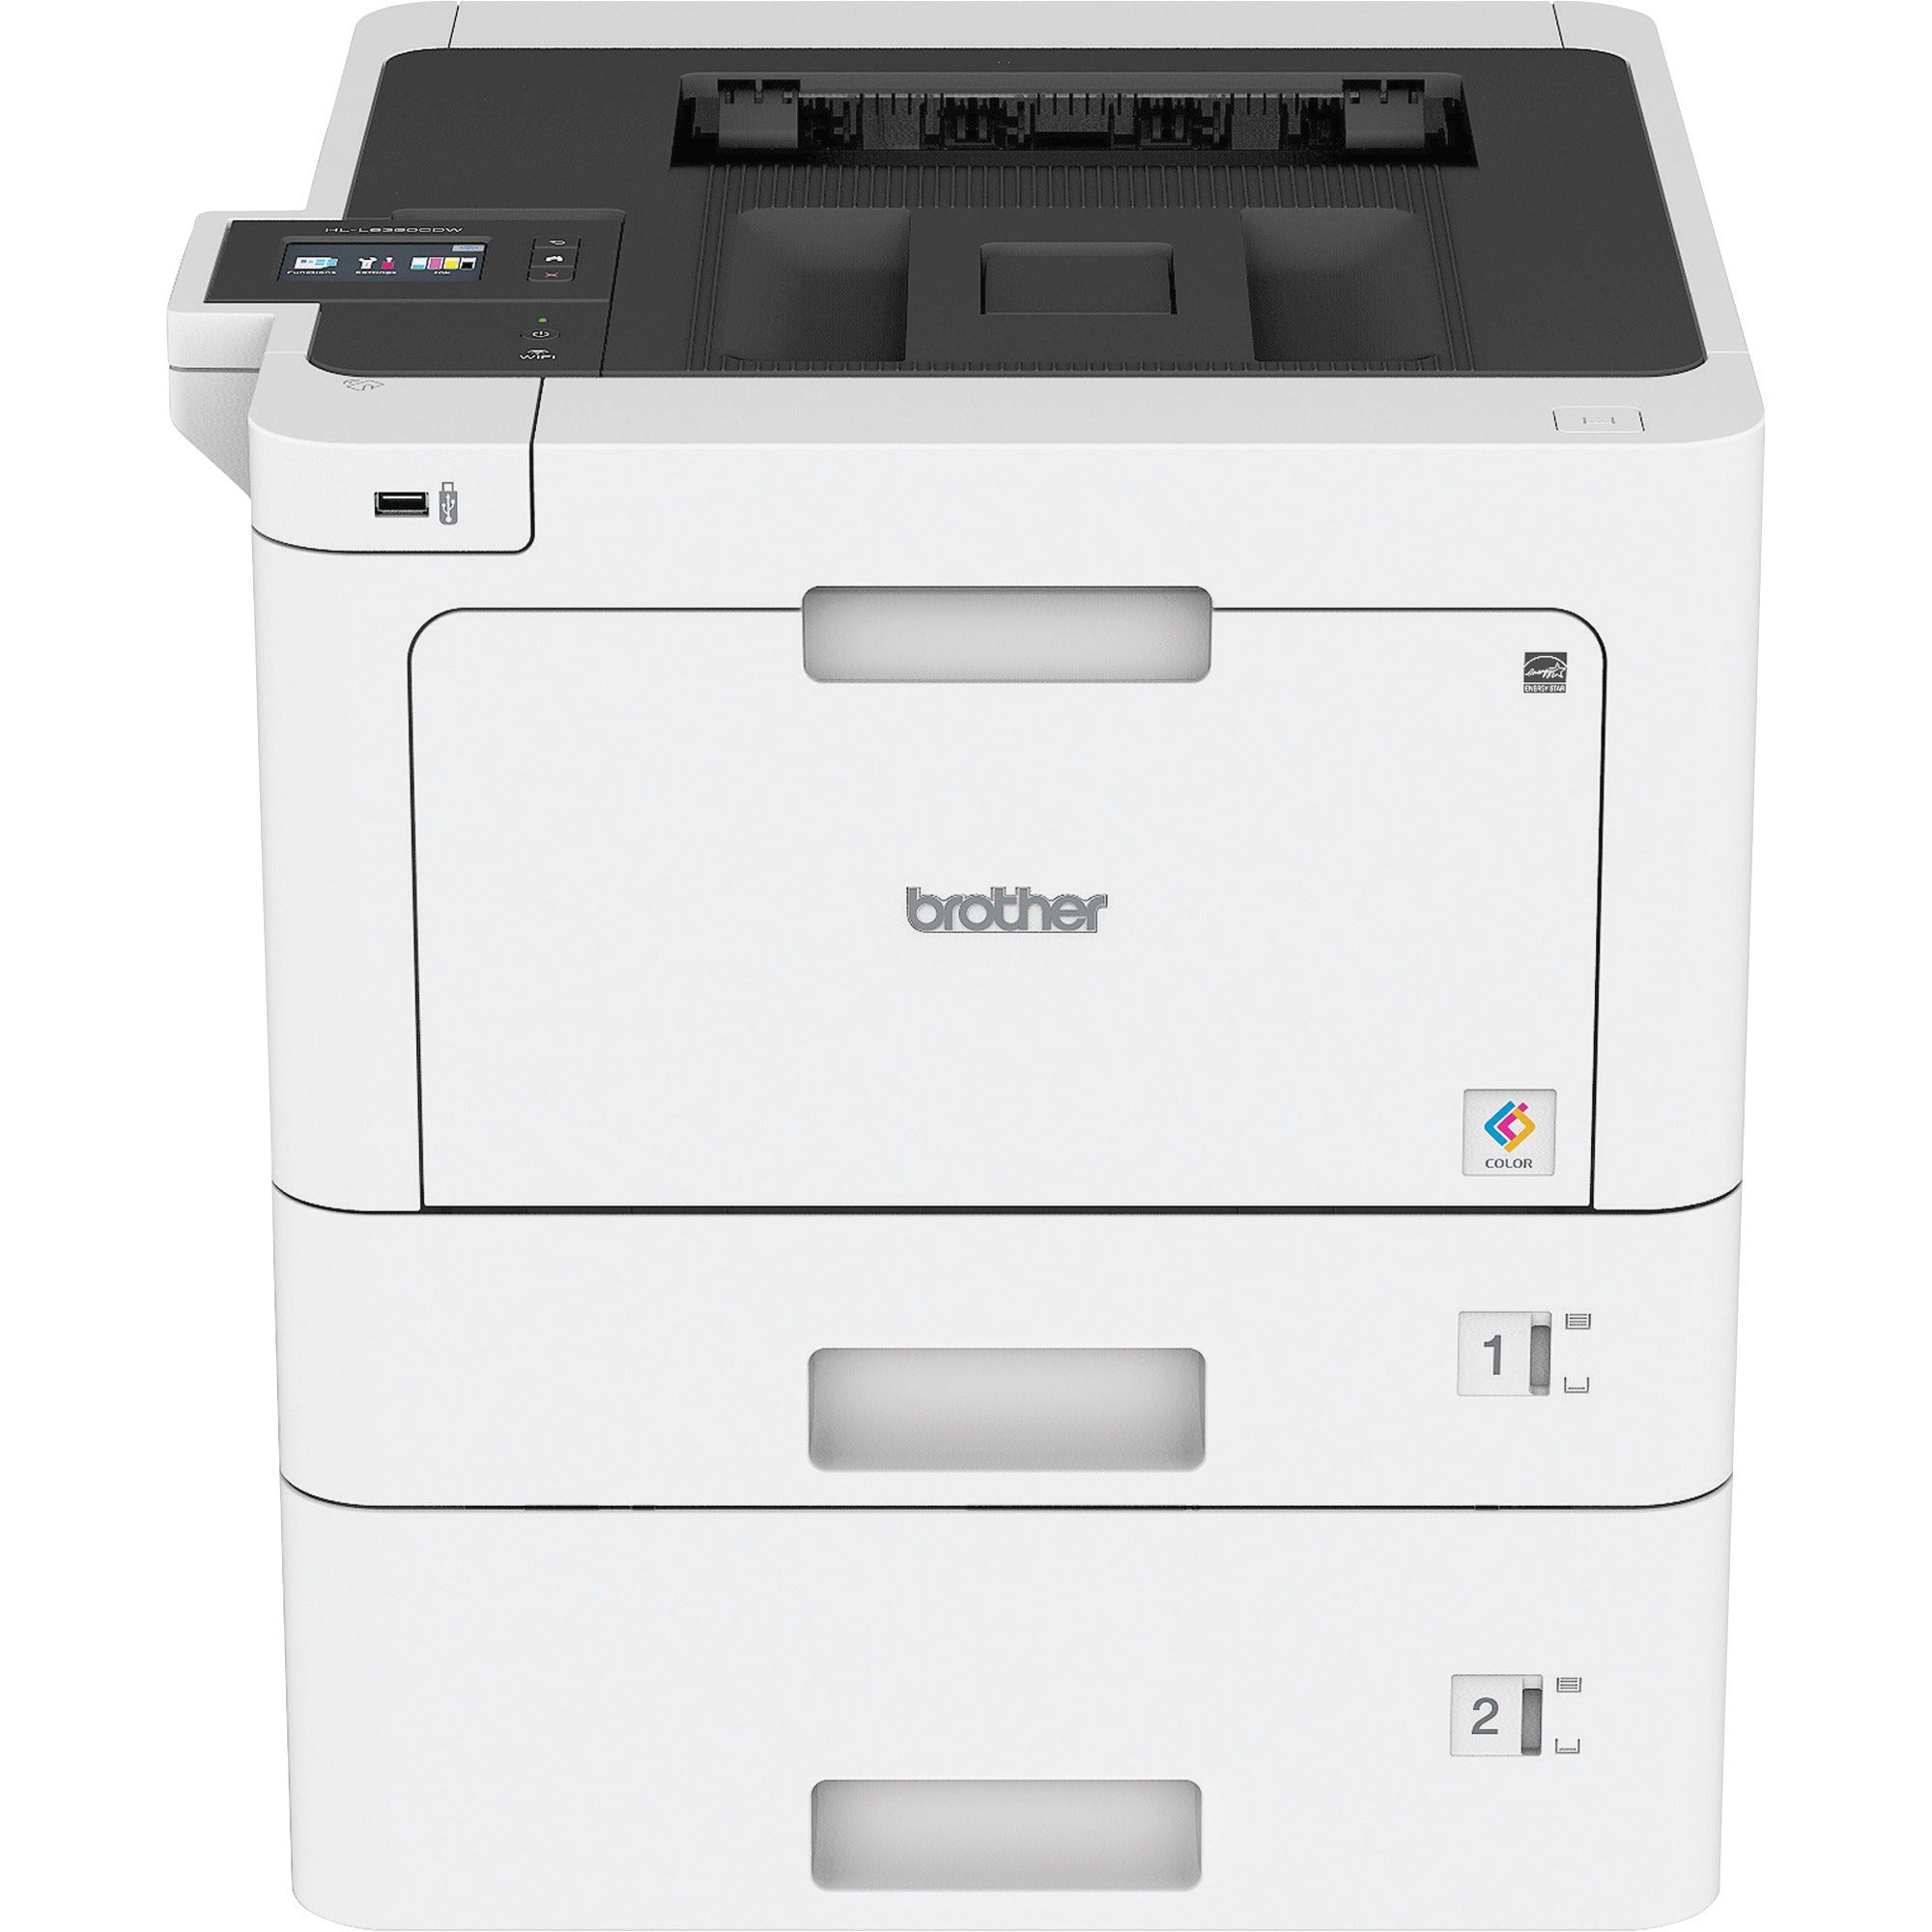 Brother Business Color Laser Printer HL-L8360CDWT - Wireless Networking - Dual Trays - Color Laser Printer - 33 ppm Mono / 33 ppm Color - Automatic Duplex Print - Ethernet - Wireless LAN - USB - 1